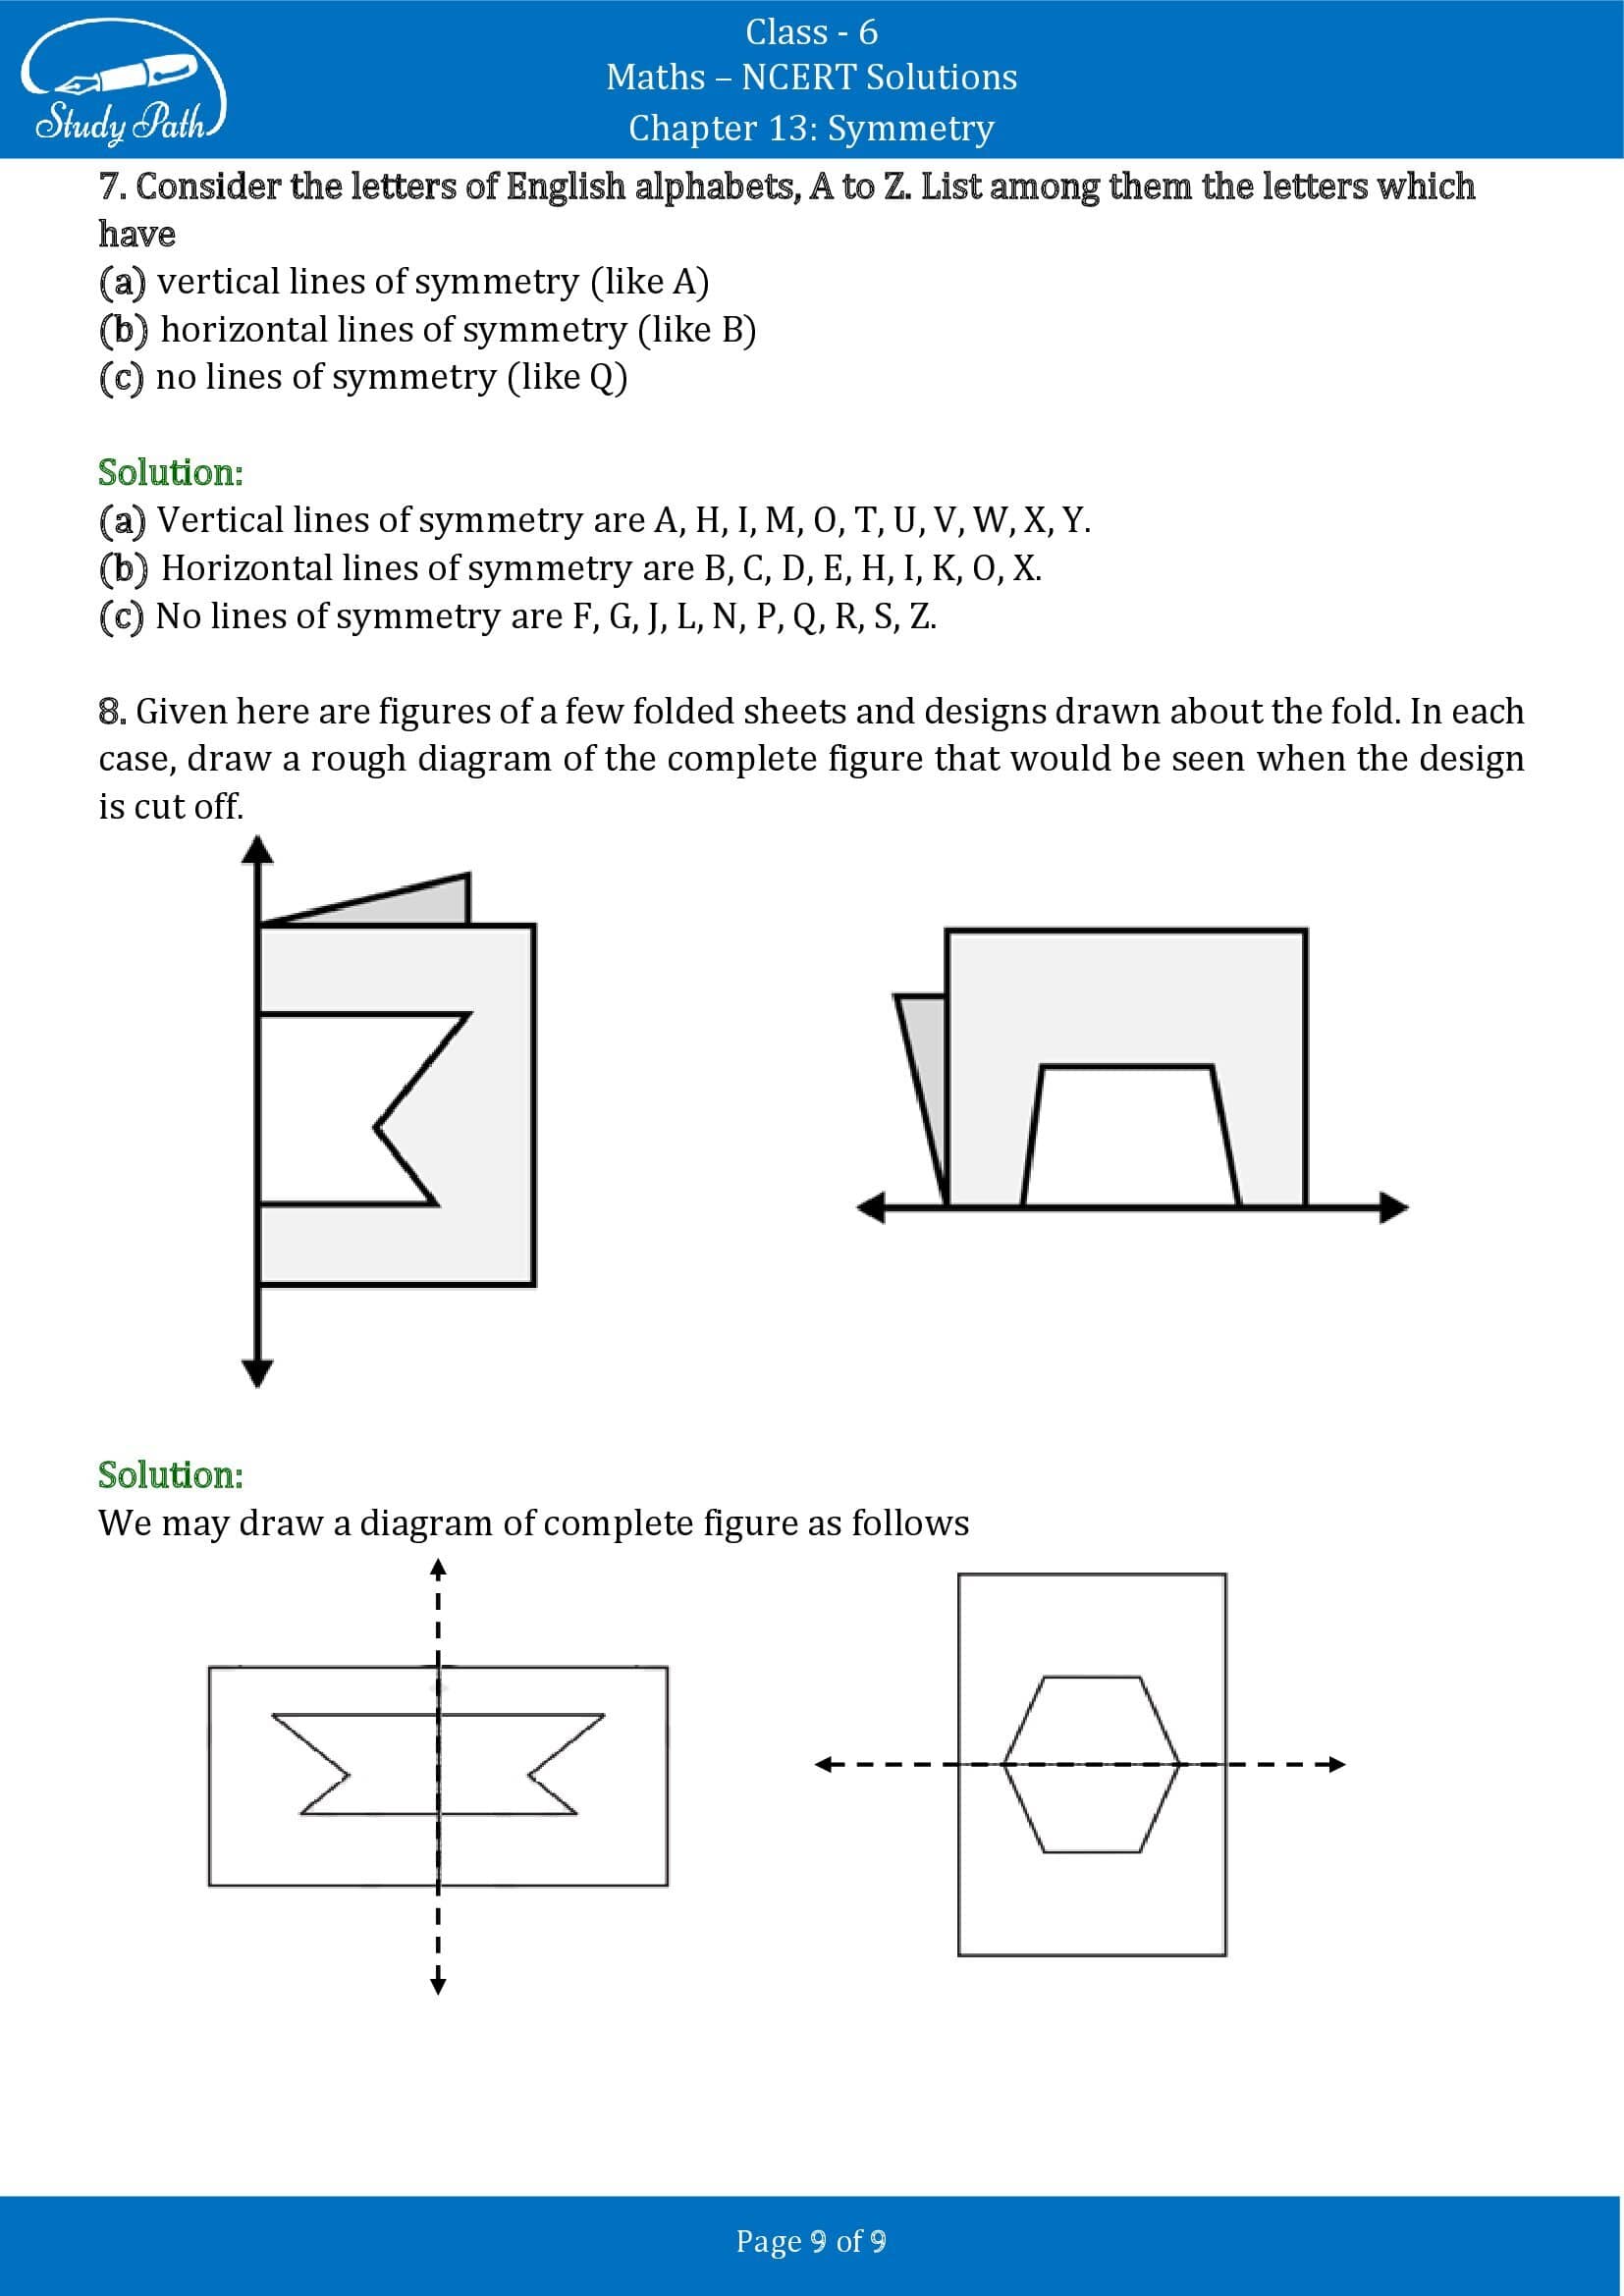 NCERT Solutions for Class 6 Maths Chapter 13 Symmetry Exercise 13.2 00009